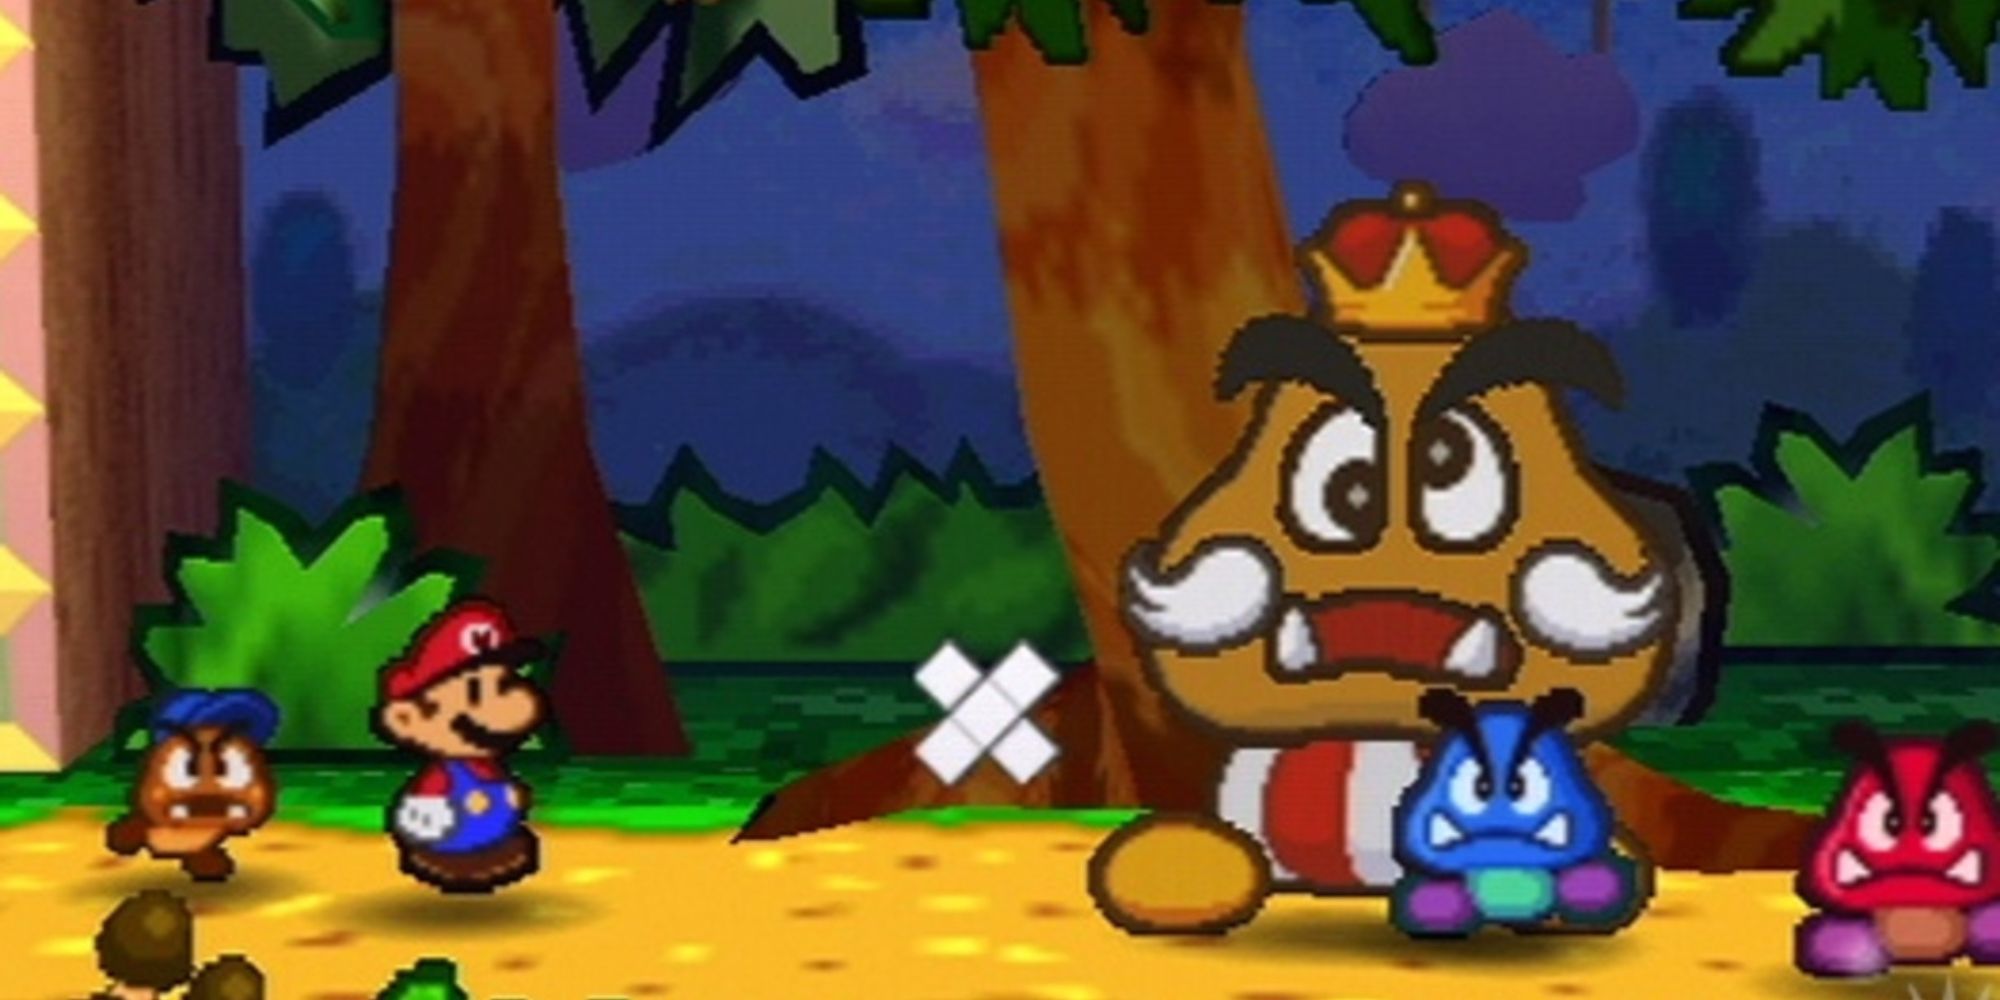 Mario approaching an injured Goomba in Paper Mario